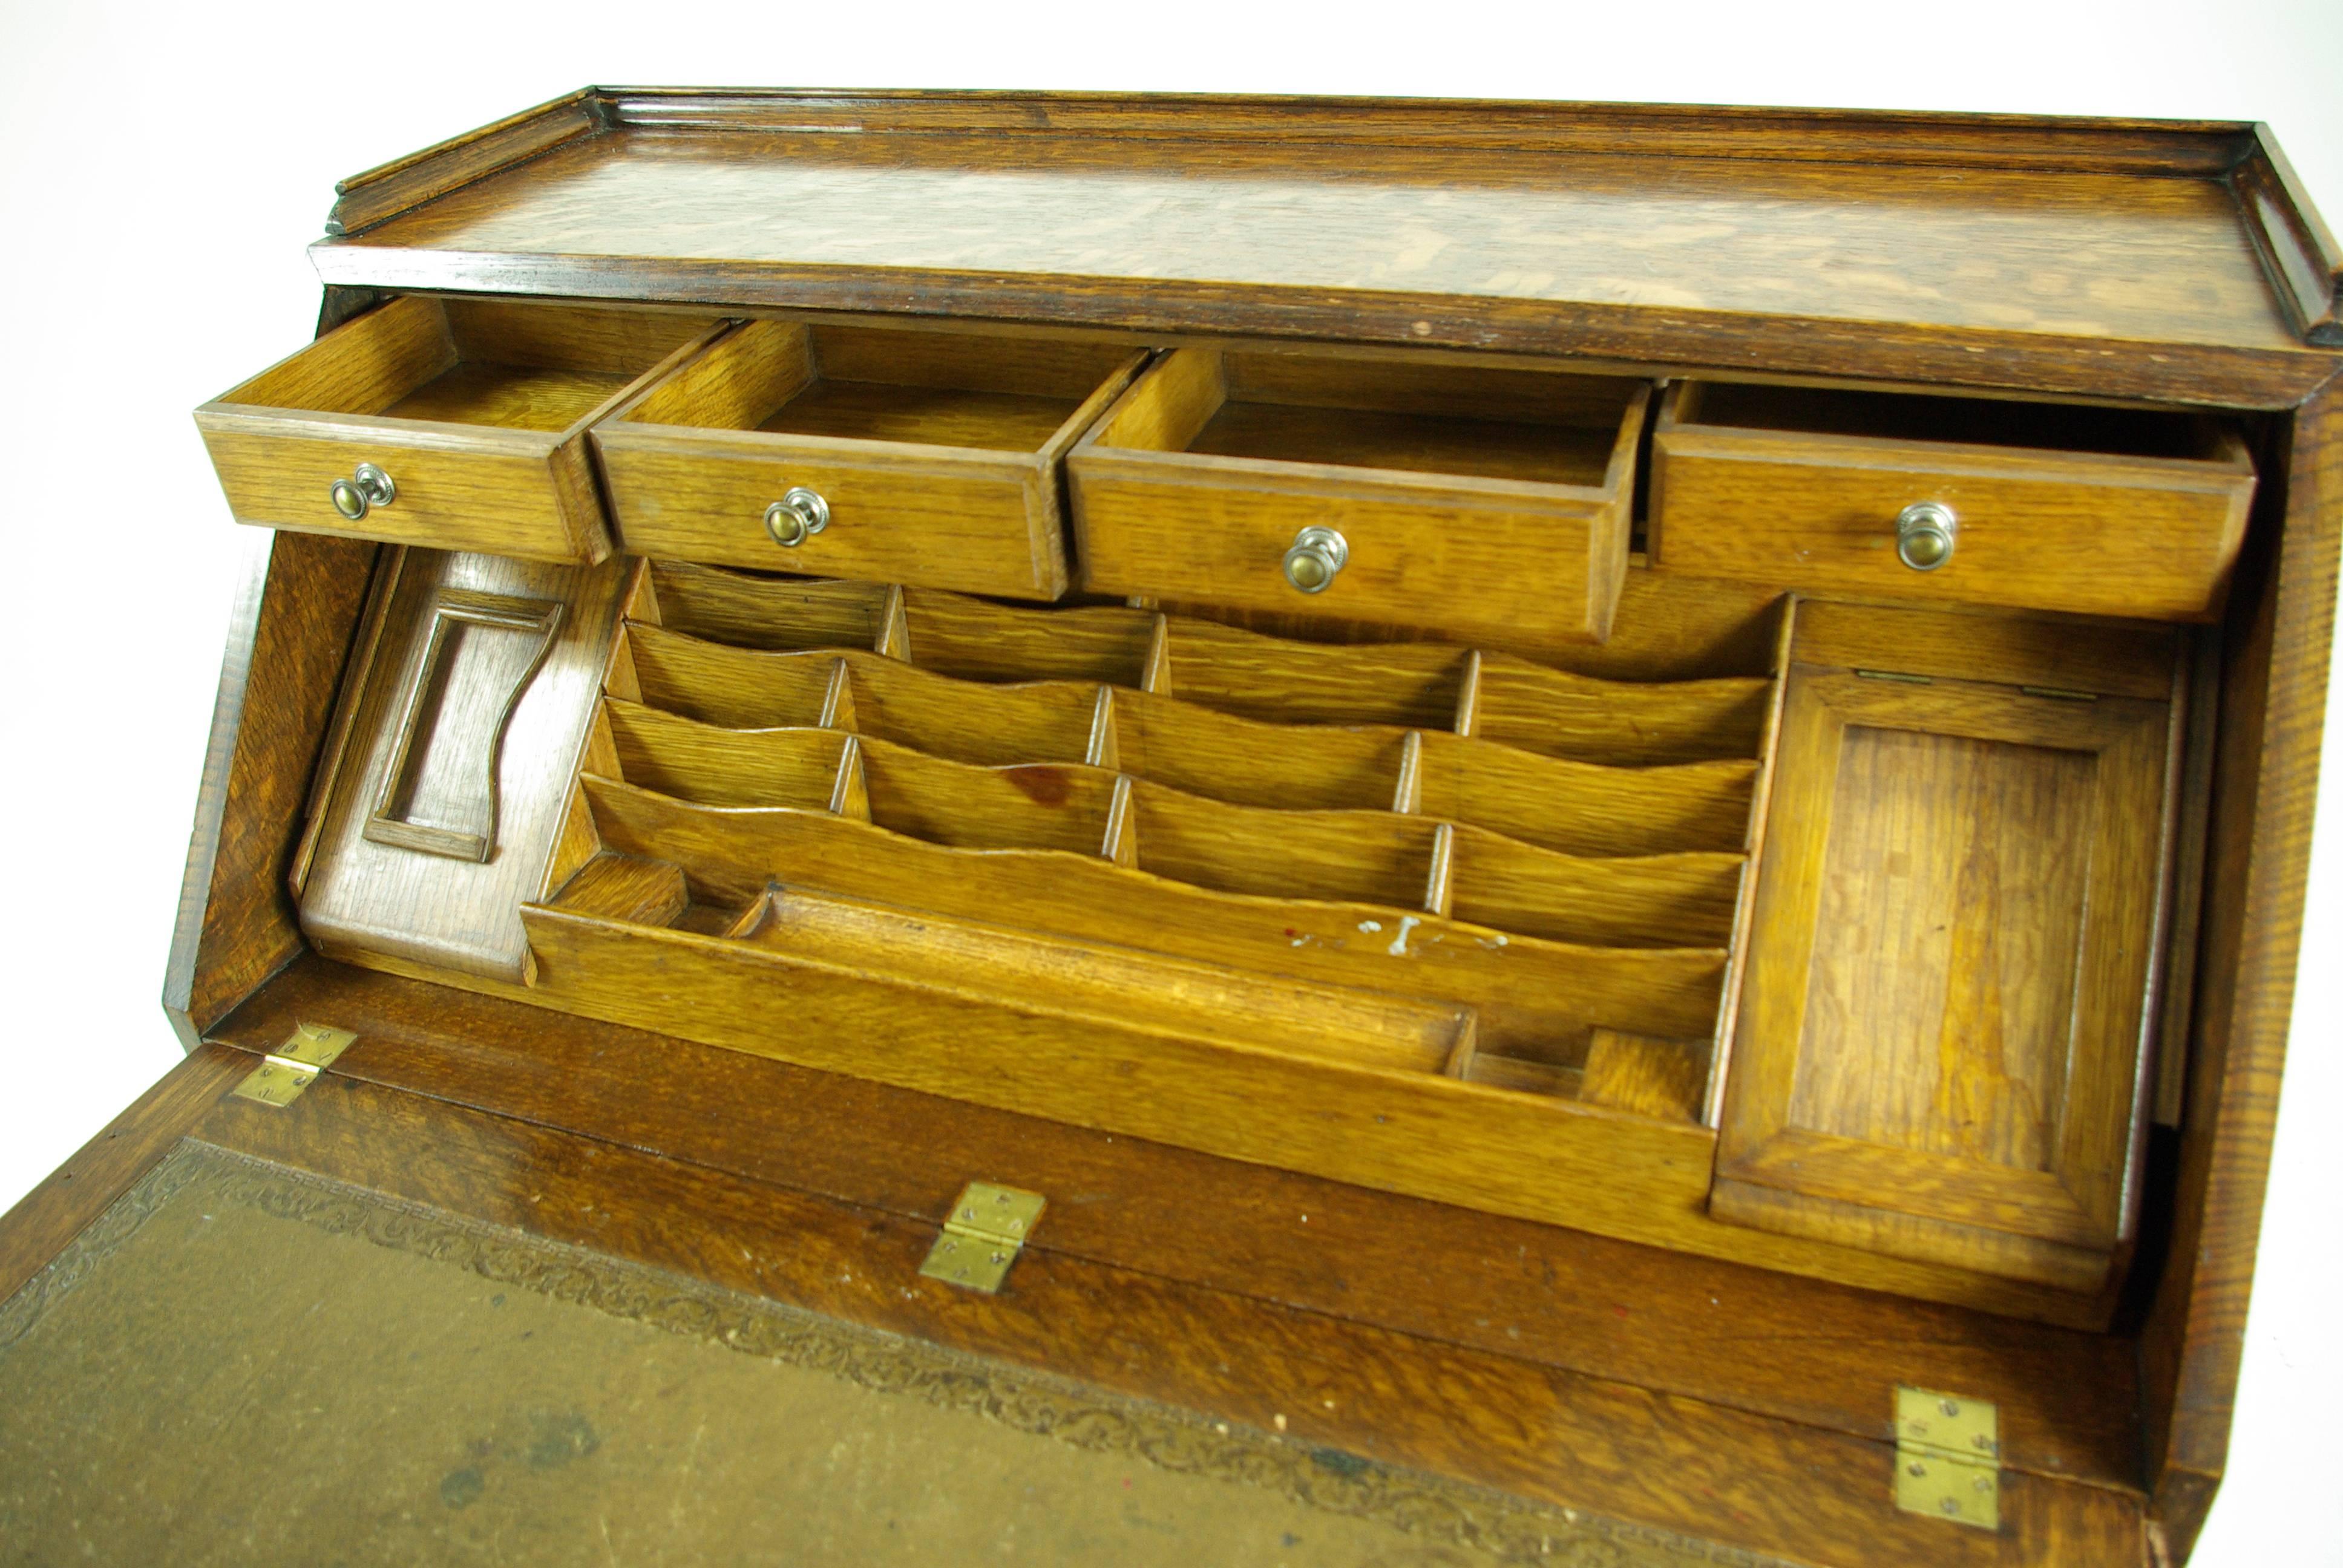 Scotland,
1920.
Solid tiger oak construction.
Original finish.
3/4 gallery top.
Carved panel slant front door.
Fitted interior with dovetailed drawer
Tooled leather writing surface.
Three serpentine front drawers with original brass hardware.
Ending